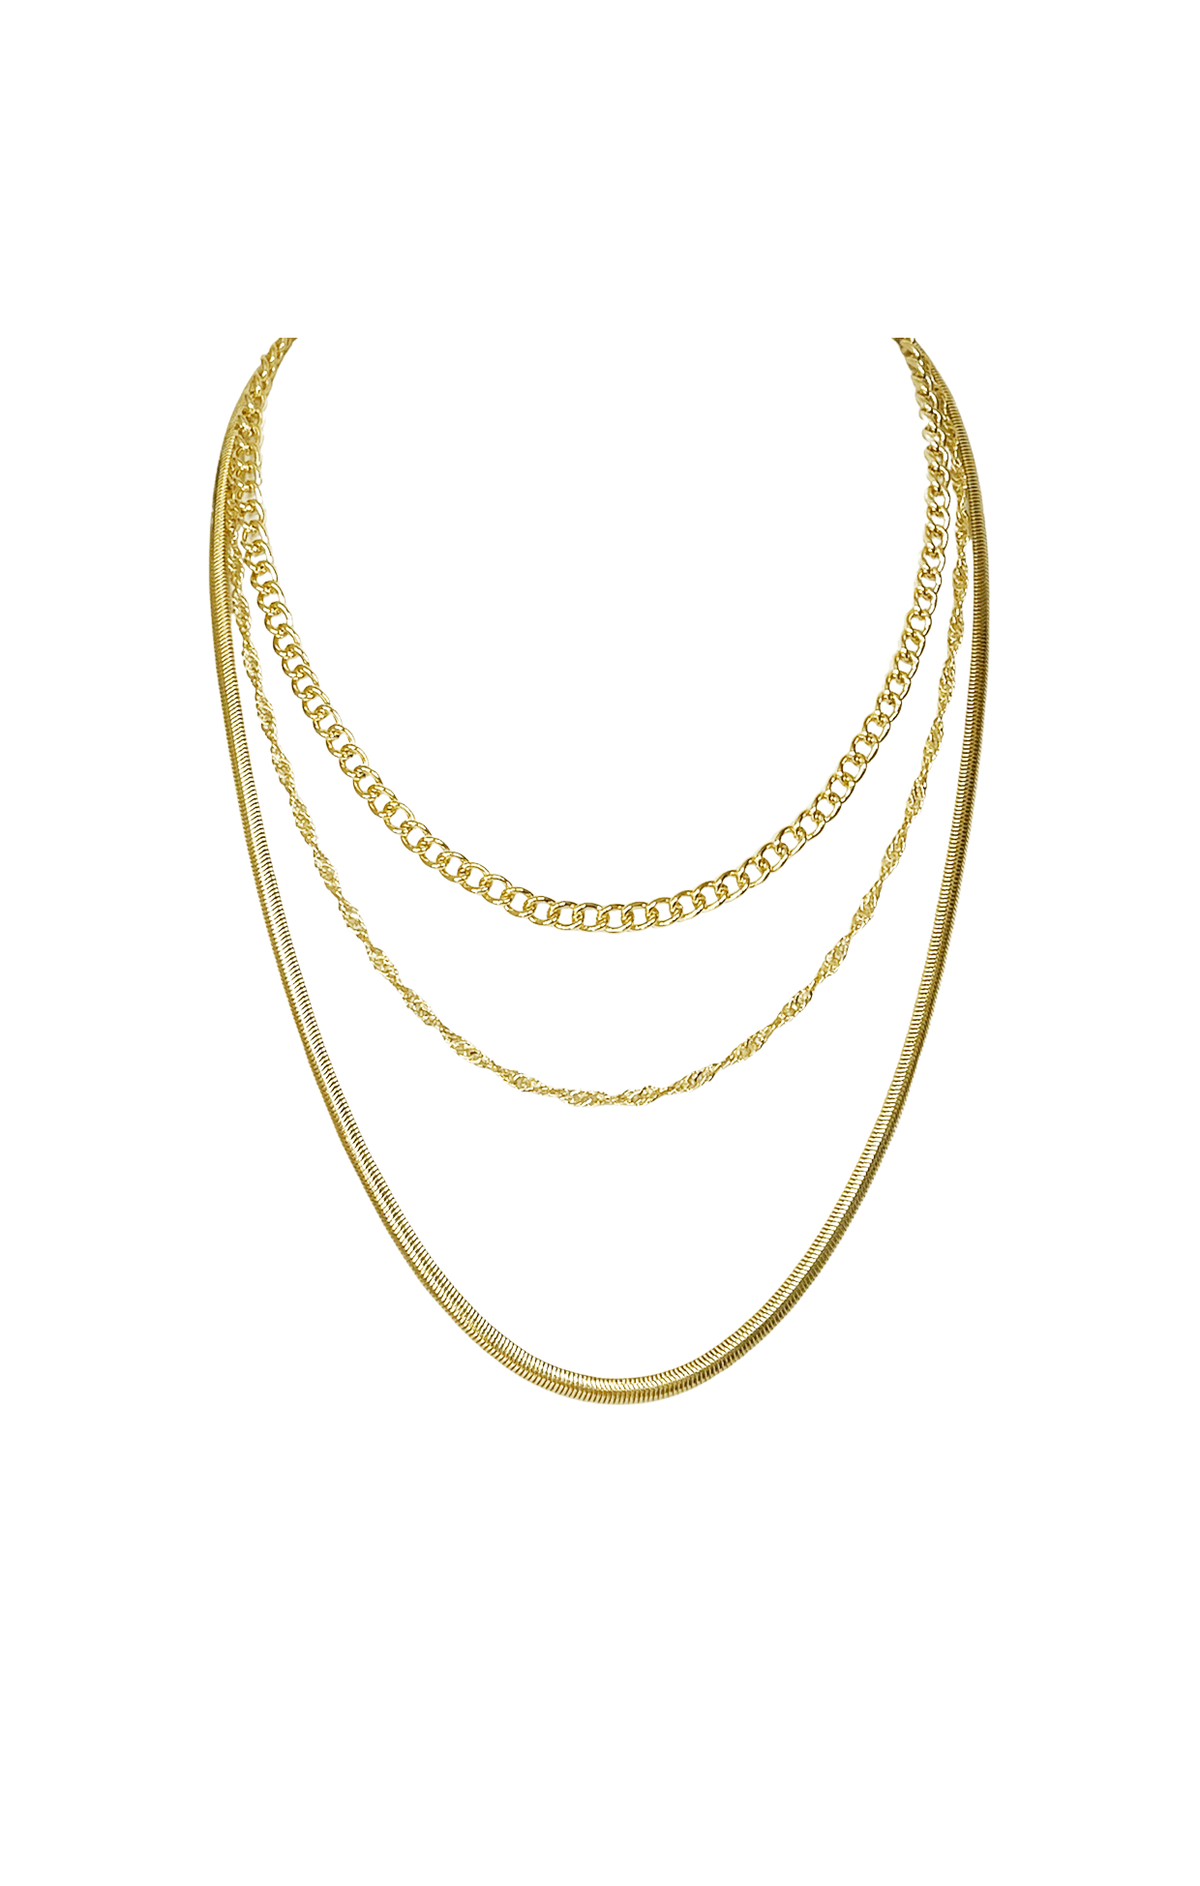 ACCESSORIES Necklaces One Size / Neutral HERRINGBONE LAYERED NECKLACE IN GOLD